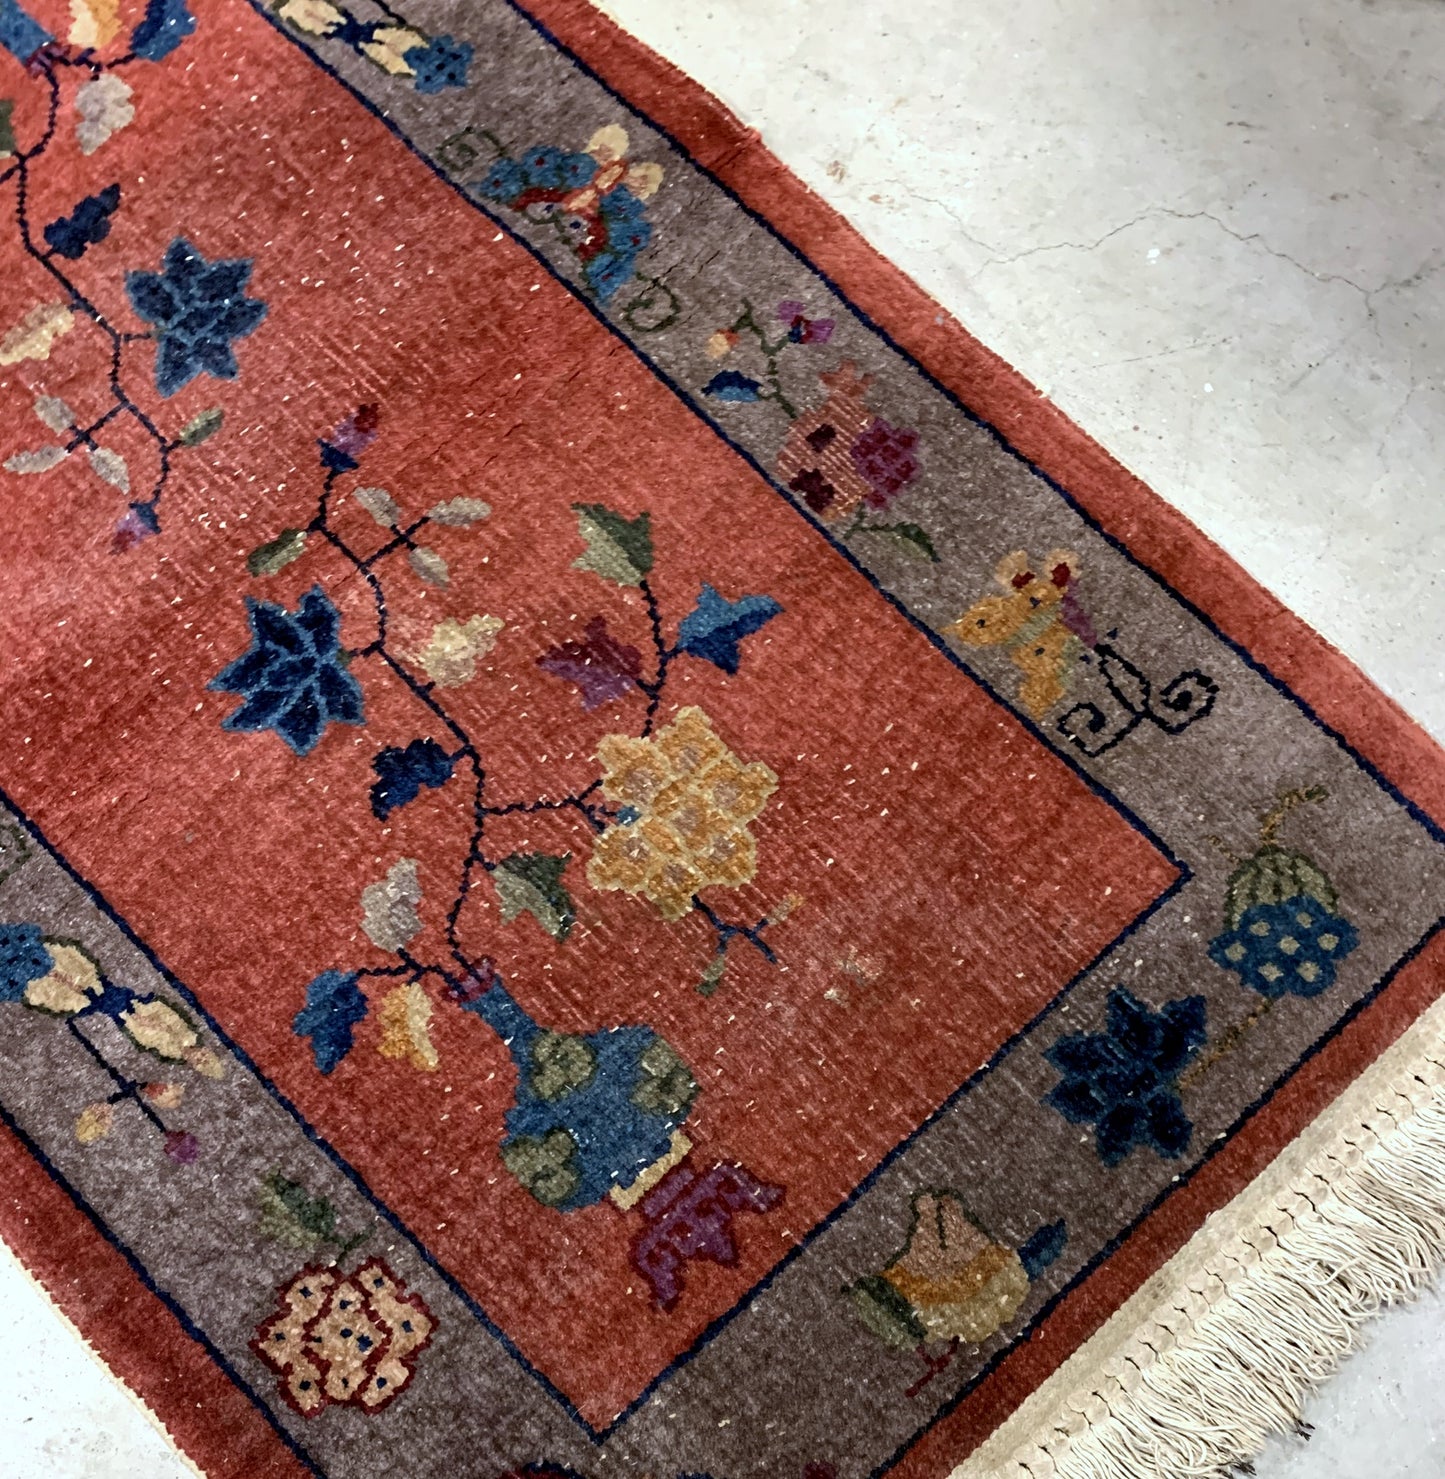 Handmade antique Art Deco Chinese rug in red shade with greyish border. The rug has traditional floral Art Deco design. It is from the beginning of 20th century in original condition, it has some low pile.